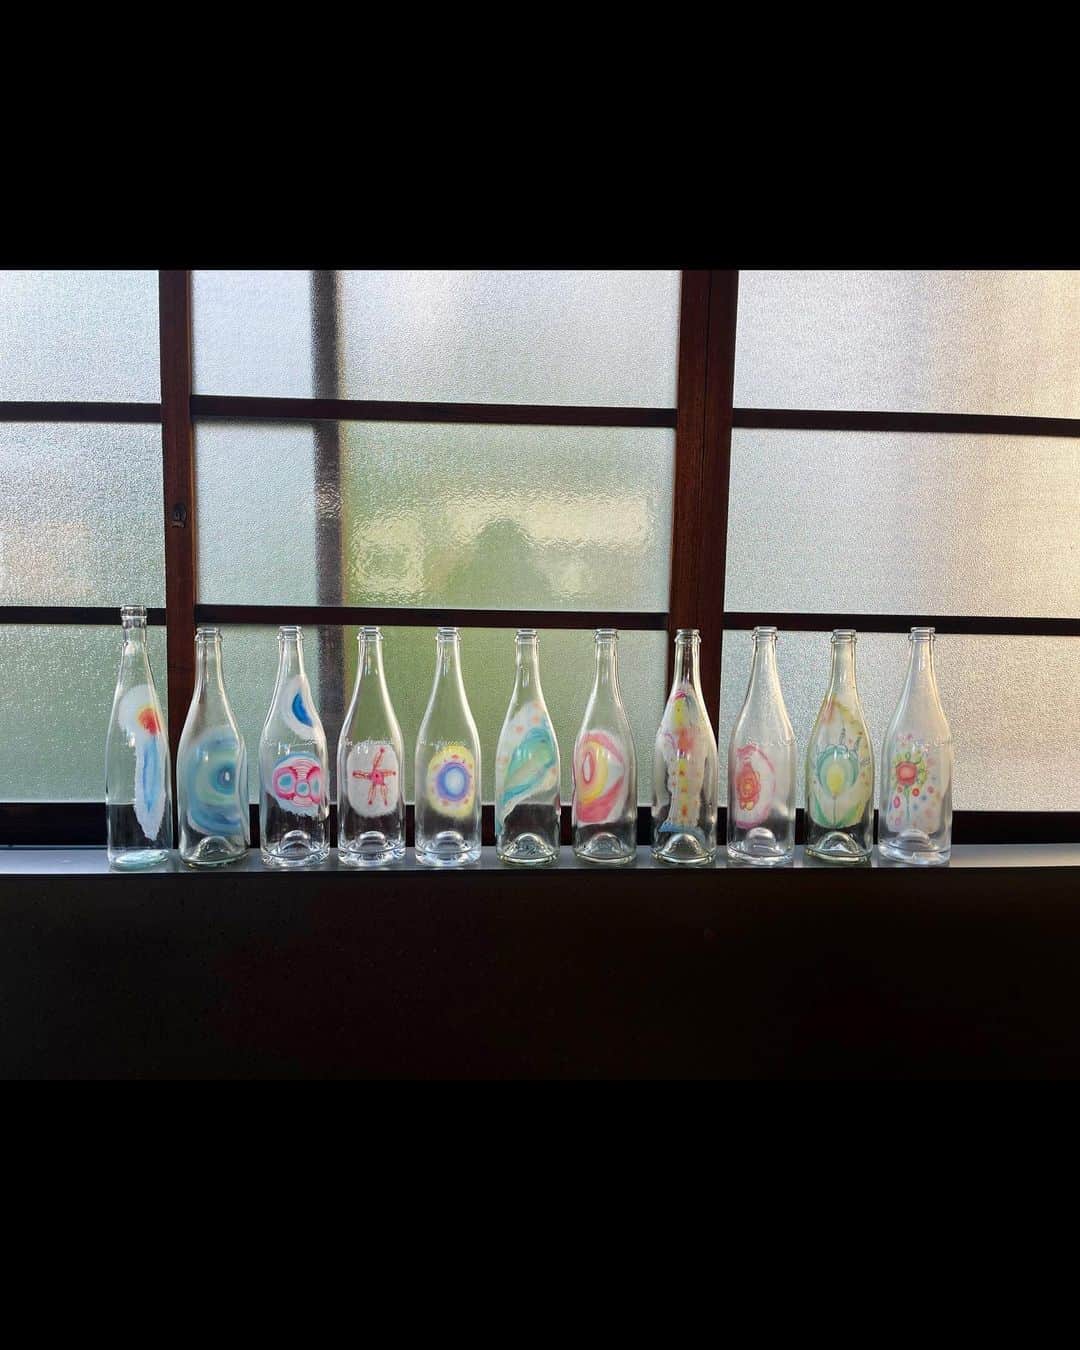 下條ユリさんのインスタグラム写真 - (下條ユリInstagram)「🌌 Cosmos in the bottles  Collaboration with Masayo  それぞれの瓶に詰まった それぞれの物語 (日本語↓)  I always wanted to make wine labels, to be a storyteller for the cosmos in the bottle.   I love watercolors or ink because the transparency allows me to dive deeper into freedom of imagination. I wanted to see them in the water, through the glass, with reflections like mirages.   @masayofunakoshi made her cosmic liquid and poured it into those bottles.   It’s still in the process of trial and error, but I thought it would be a beautiful beginning to the collaboration with Masayo ⚪️  ずっと昔からワインのラベルを描いてみたかった。ボトルの中にある宇宙のストーリーテラーになりたくて。  水彩画やインクで絵を描きたいのは、透明だから。 より自由な想像力の奥に深く潜れそうだから。 そしてその絵たちを水の中で、ガラス越しに、光の反射の中に現れる蜃気楼のように見てみたいと思った。  雅代ちゃんが宇宙の液体を作り、その瓶の中に詰めた。  まだまだ試行錯誤の段階だけど、これは雅代ちゃんとのとても素敵なコラボレーションの始まり🤍  Photos (except 1) 相模友士郎 @yujirosagami   **Final  week 日曜日まで **  下條ユリ　 線と点と　展   Yuri Shimojo  Exhibition in Kyoto  “A line  and  a dot  and”   〜 11.26 (日)   毎週　金、土、日　 11:30-17:00 予約不要  @farmoon_kyoto  Farmoon 茶楼　 左京区北白川東久保田町九 Kyoto Japan」11月21日 16時11分 - yurishimojo